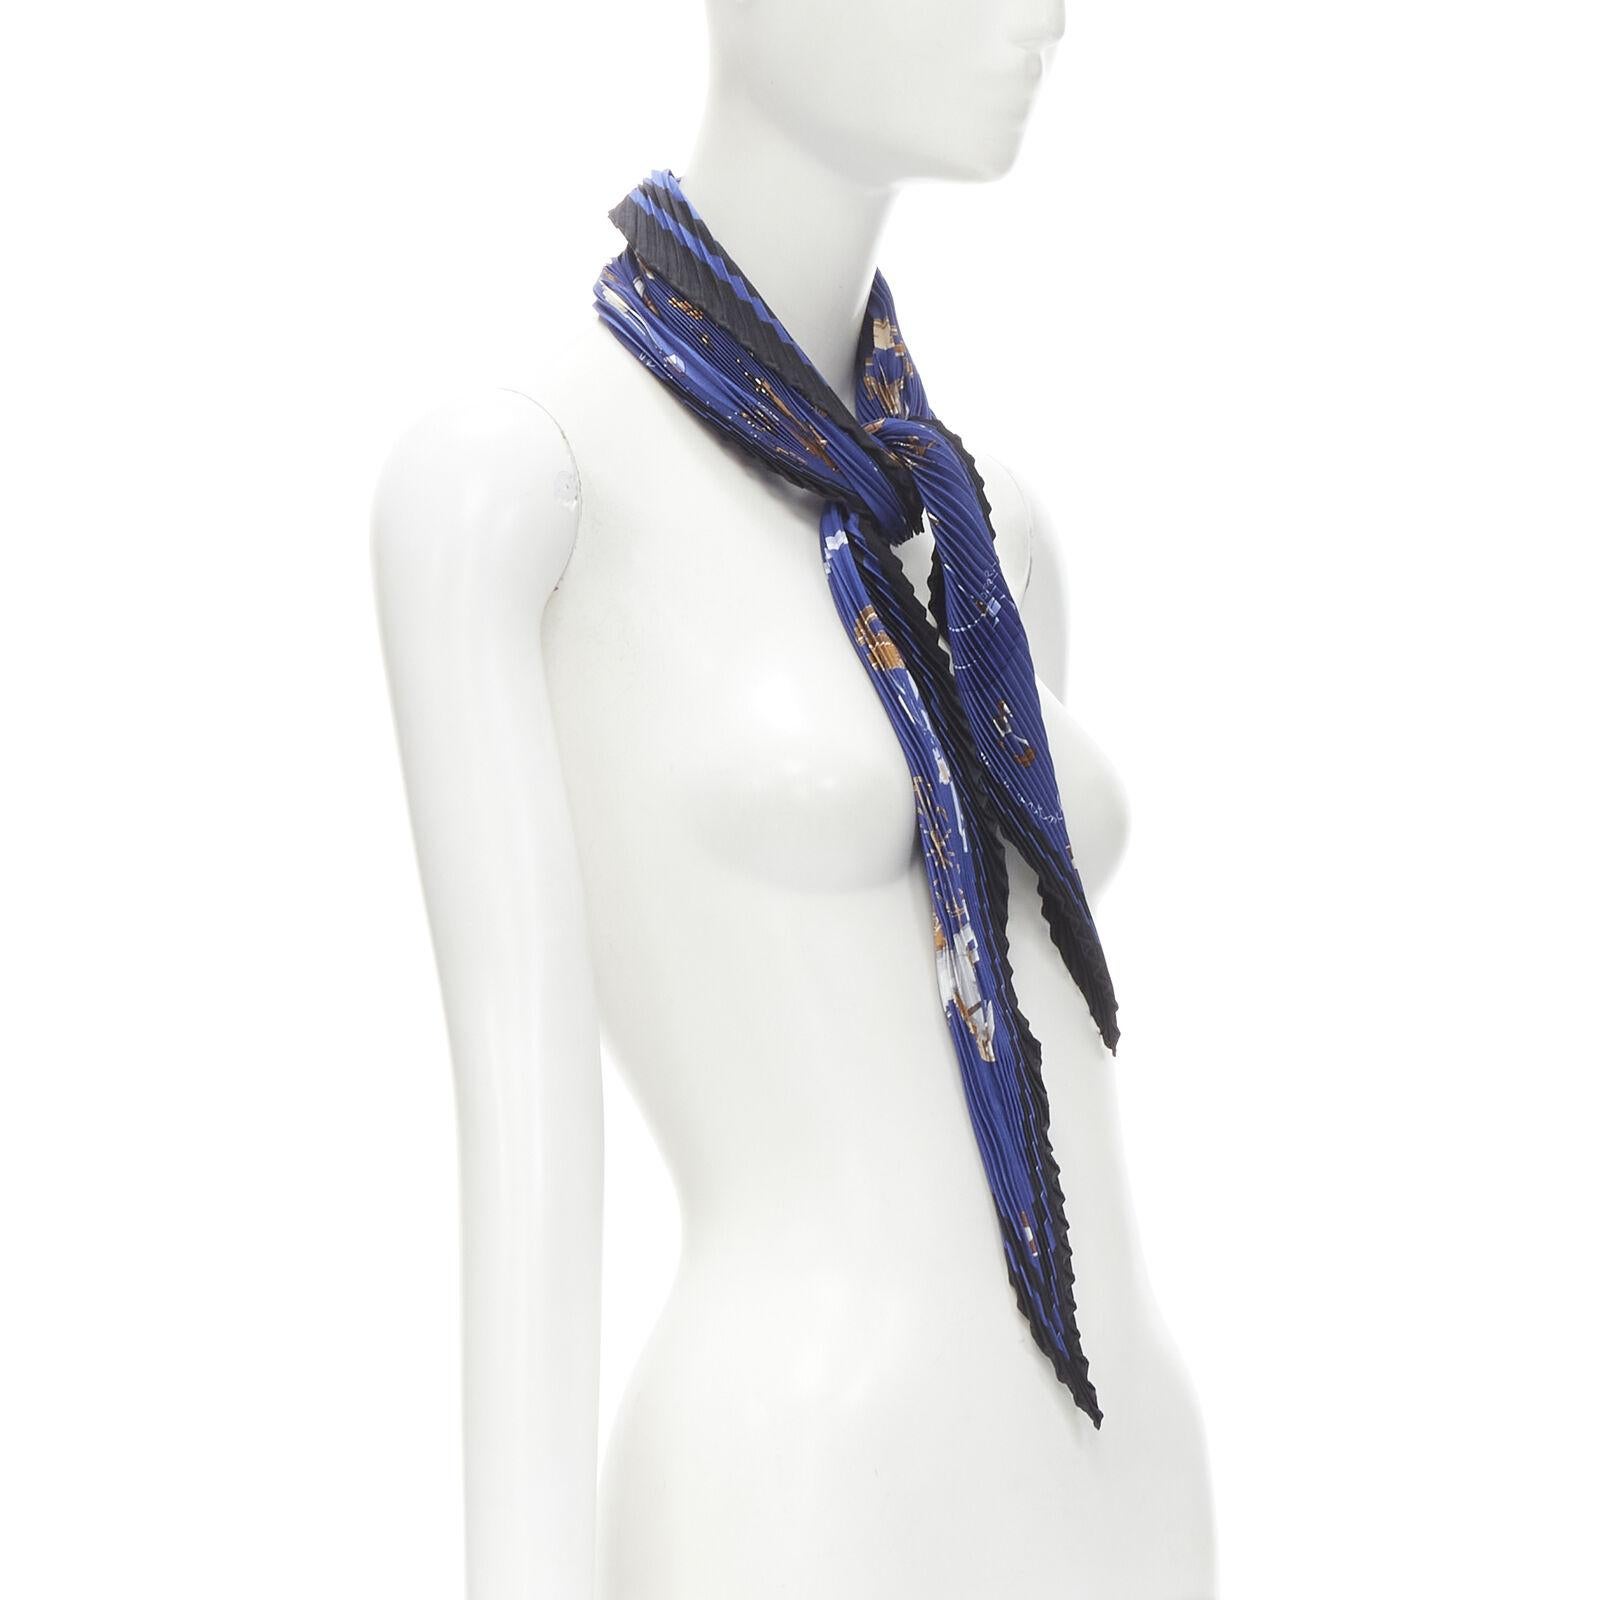 HERMES Le Carre Plisse Dimitri Rybaltchenko blue rocking horse pleated scarf
Reference: ANWU/A00587
Brand: Hermes
Model: Le Carre Plisse
Material: Feels like silk
Color: Blue, Multicolour
Pattern: Multi

CONDITION:
Condition: Excellent, this item